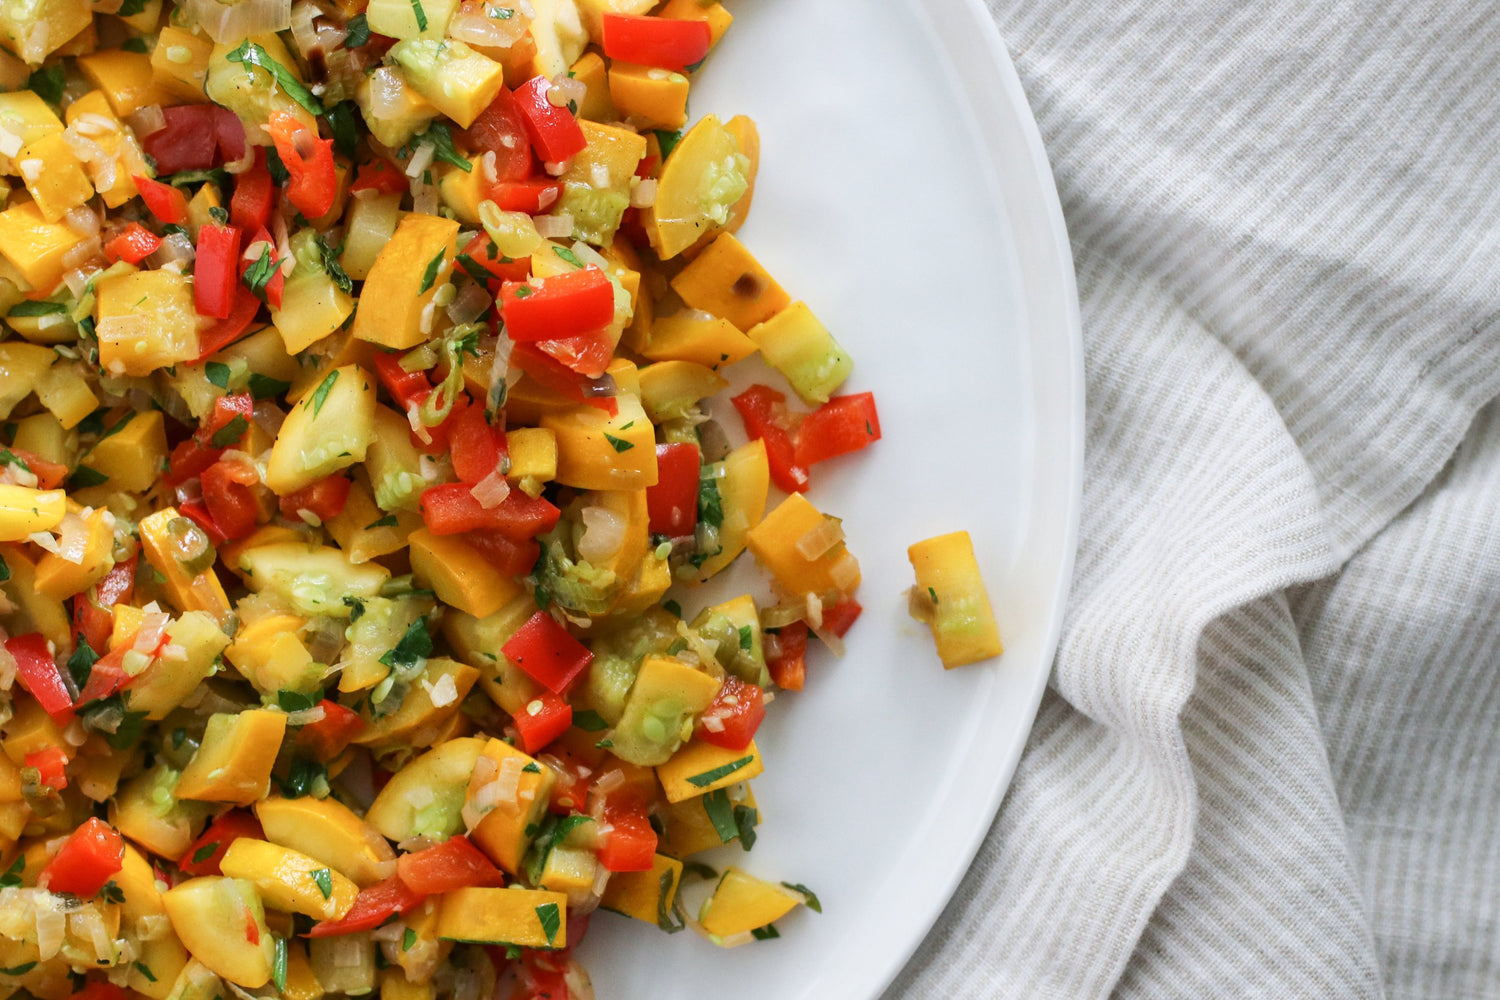 Sautéed Summer Squash with Red Pepper and Thyme